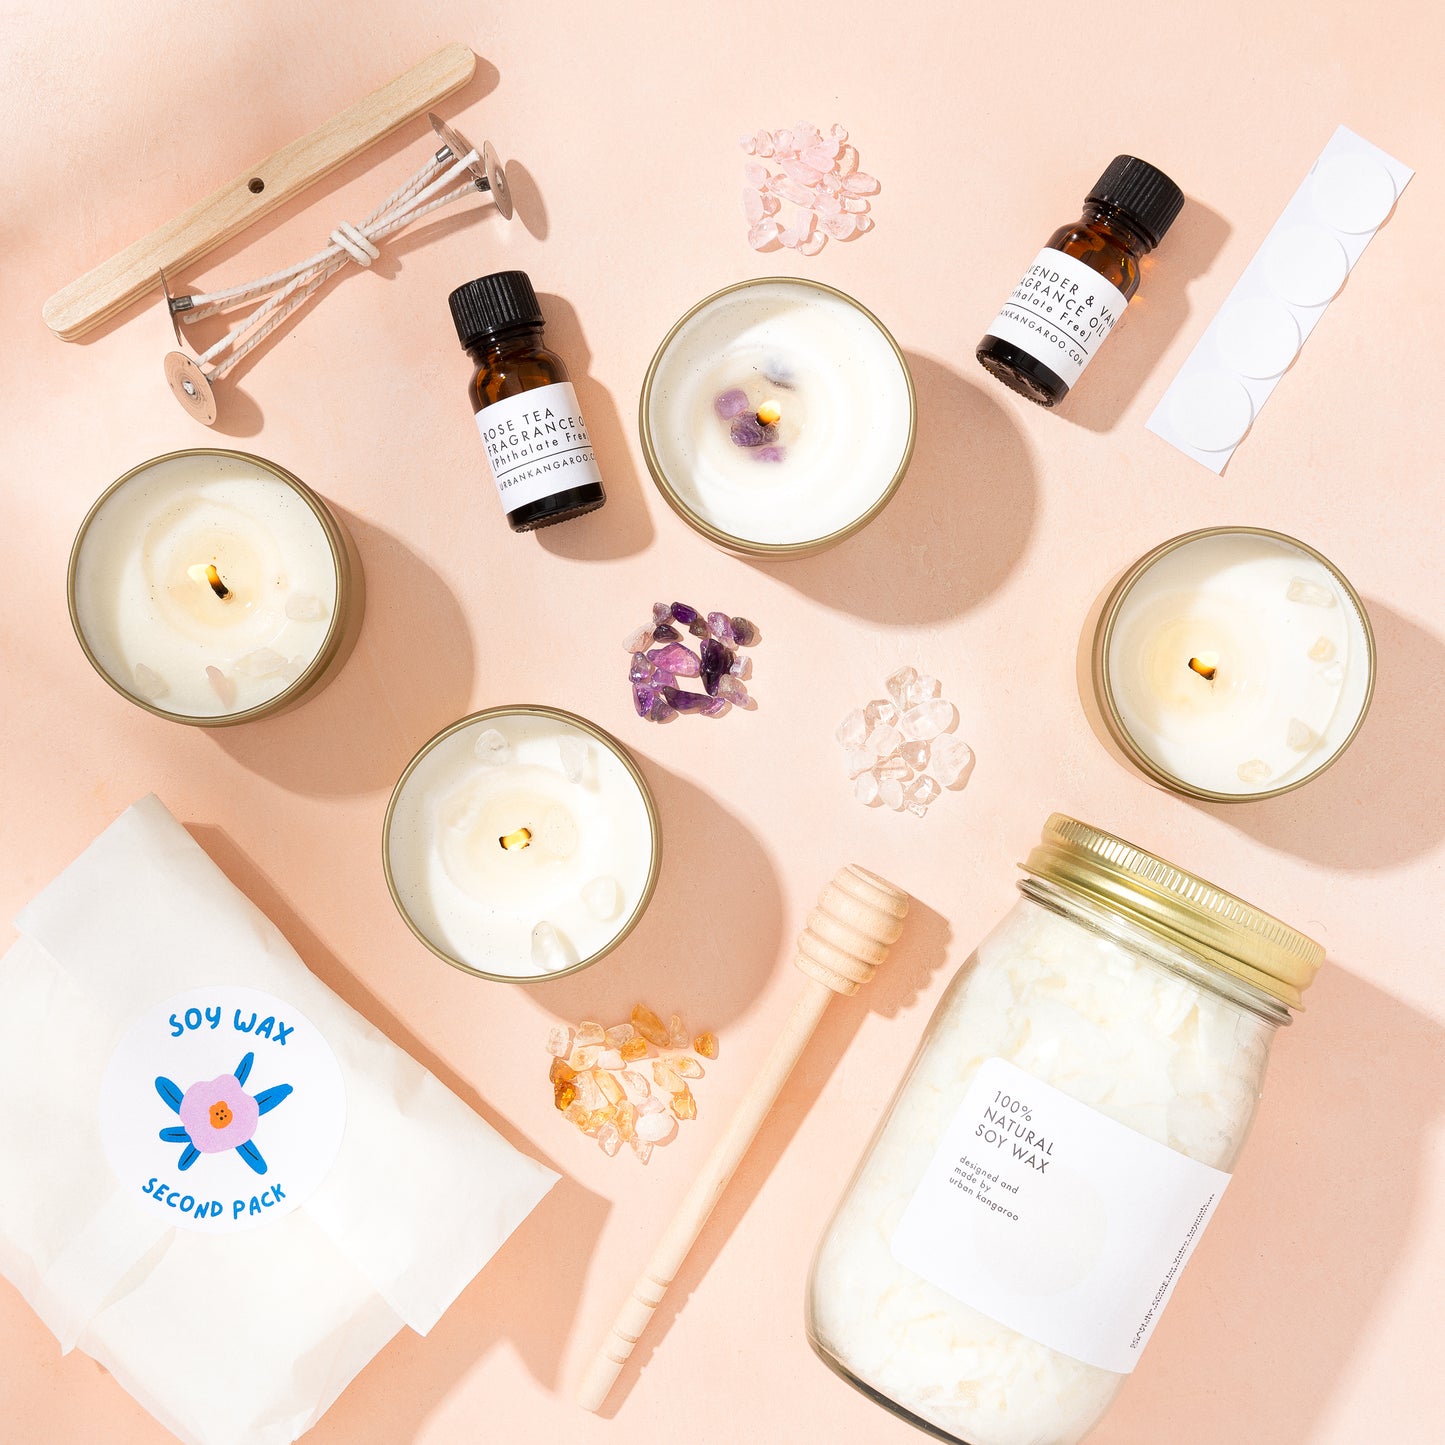 Cosmic Crystal Soy Wax Candle Making Kit